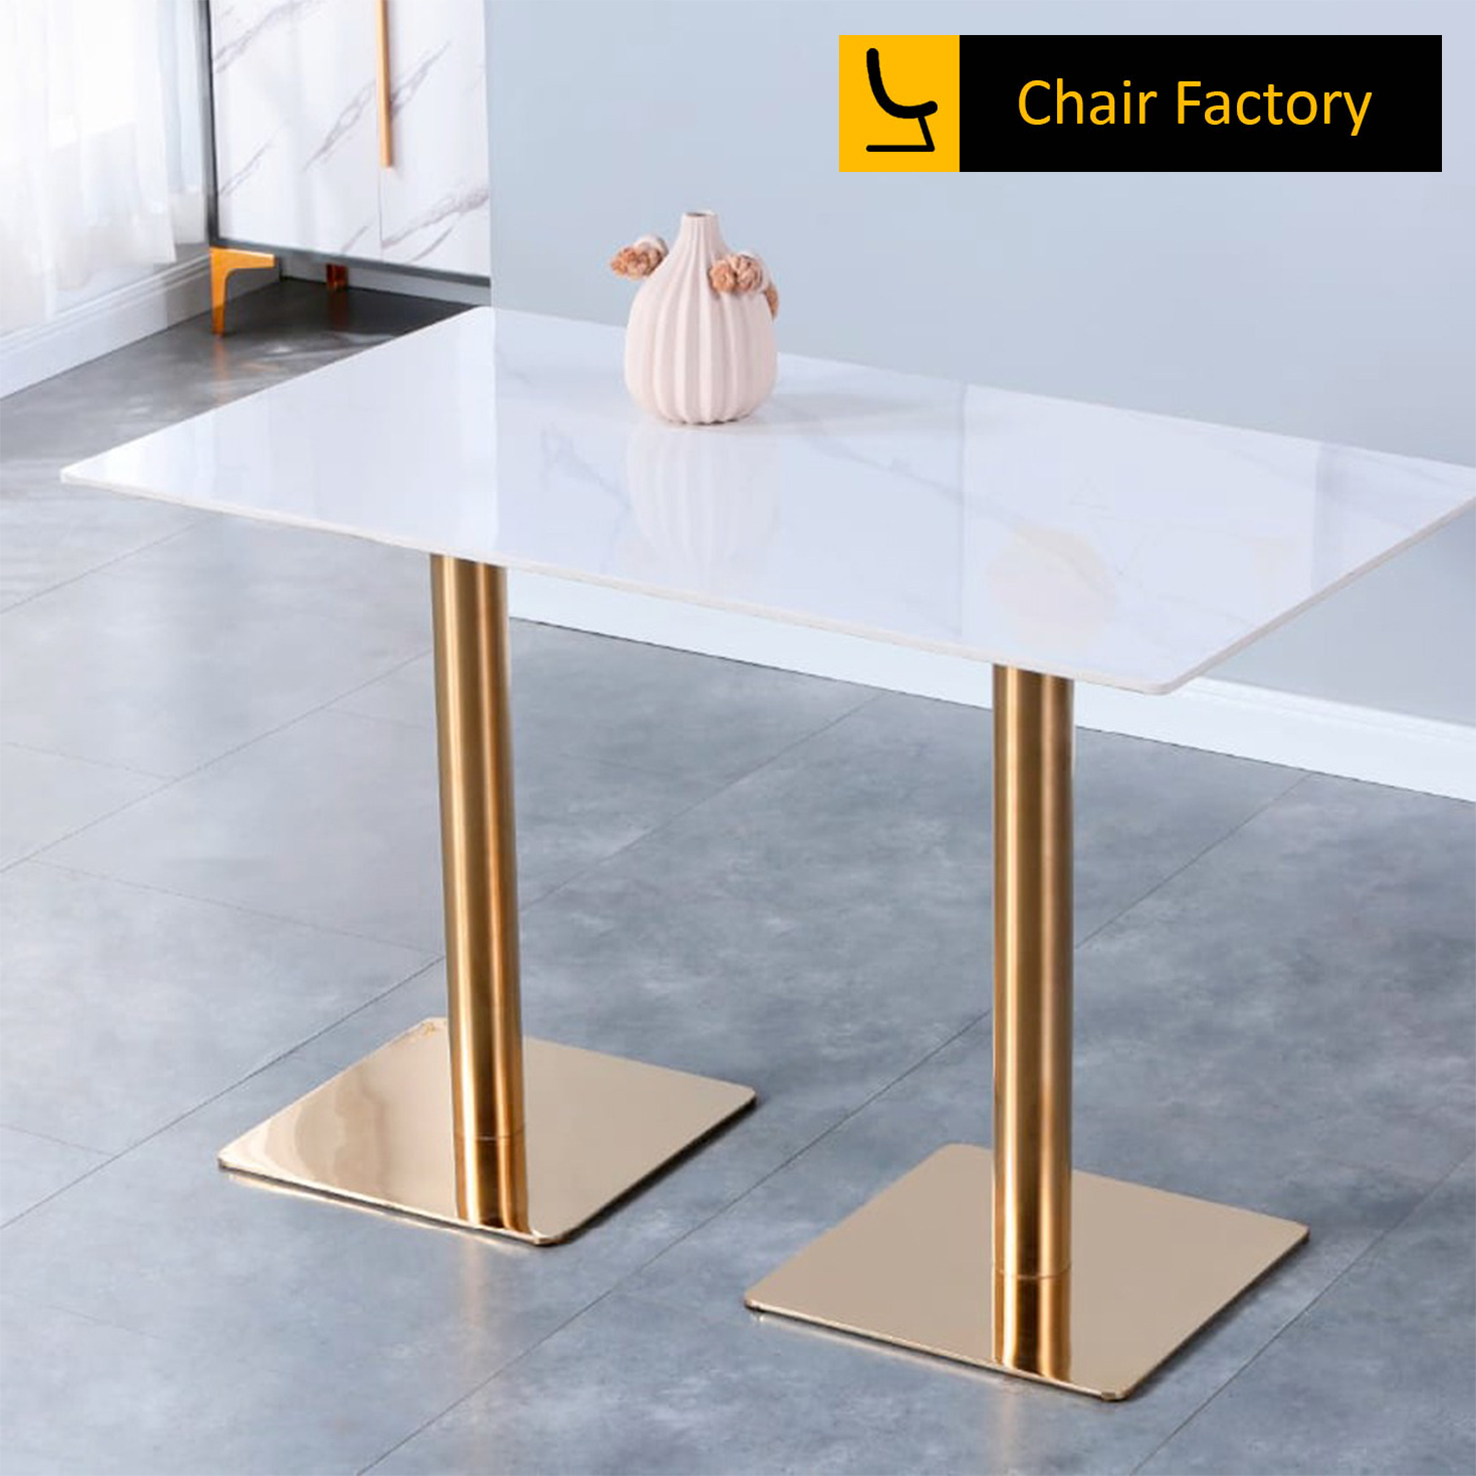 ORRA white and Gold Rectangular Cafe Table